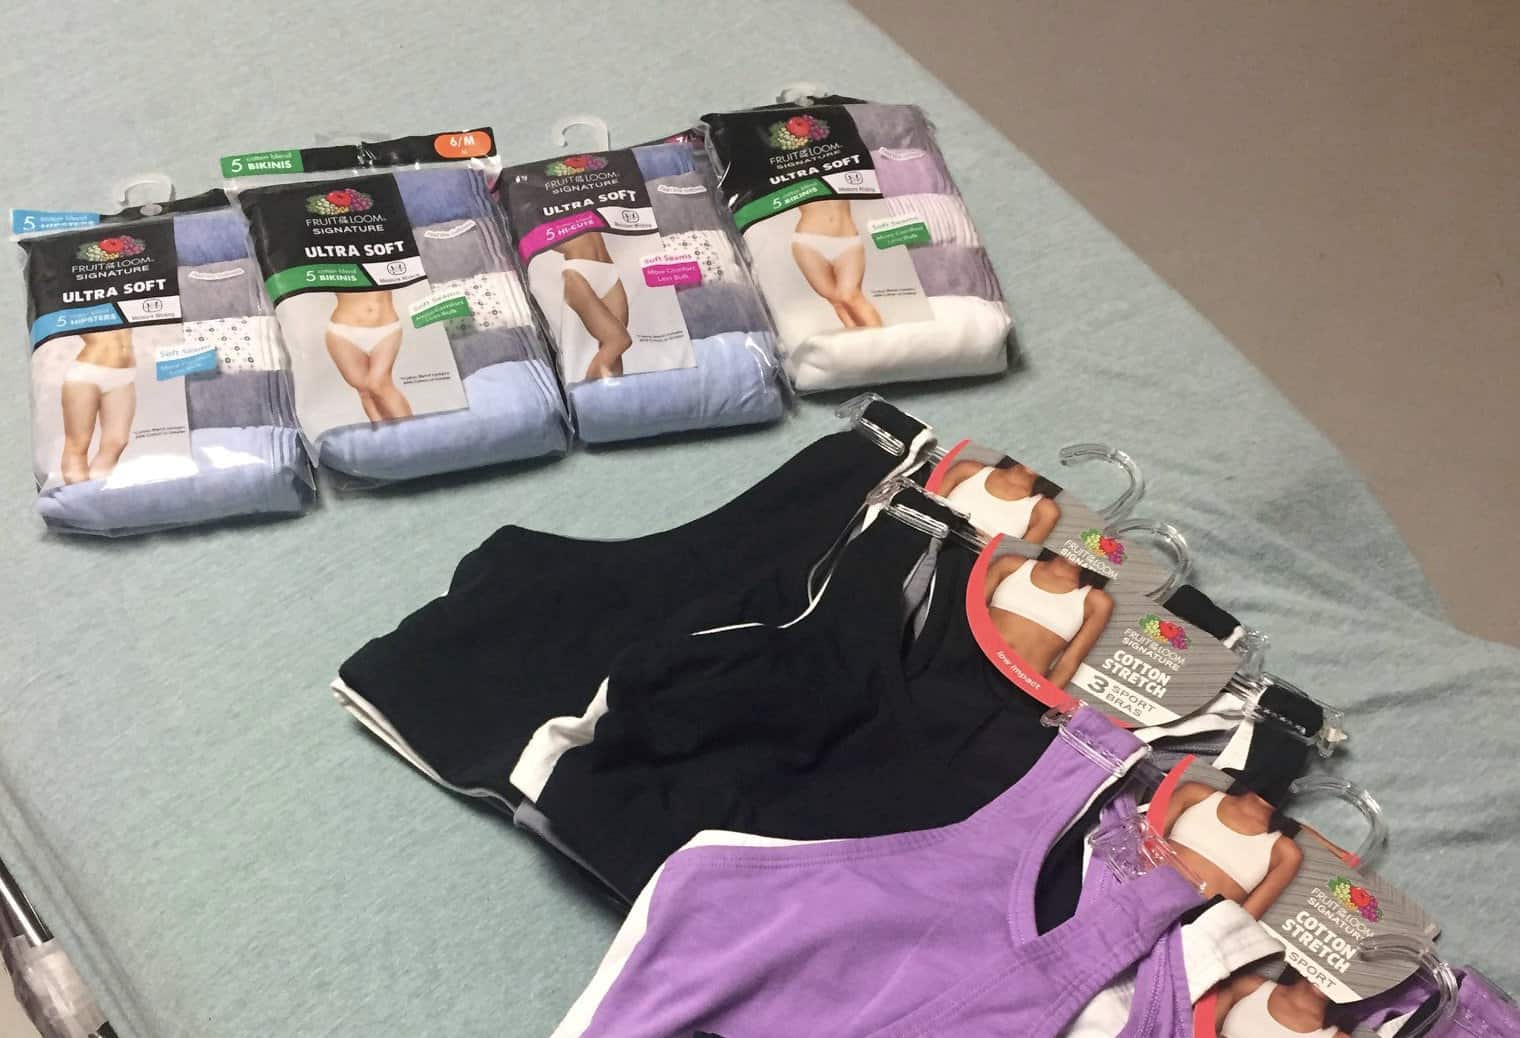 Nurse collected underwear so rape victims do not have to leave hospital without underwear